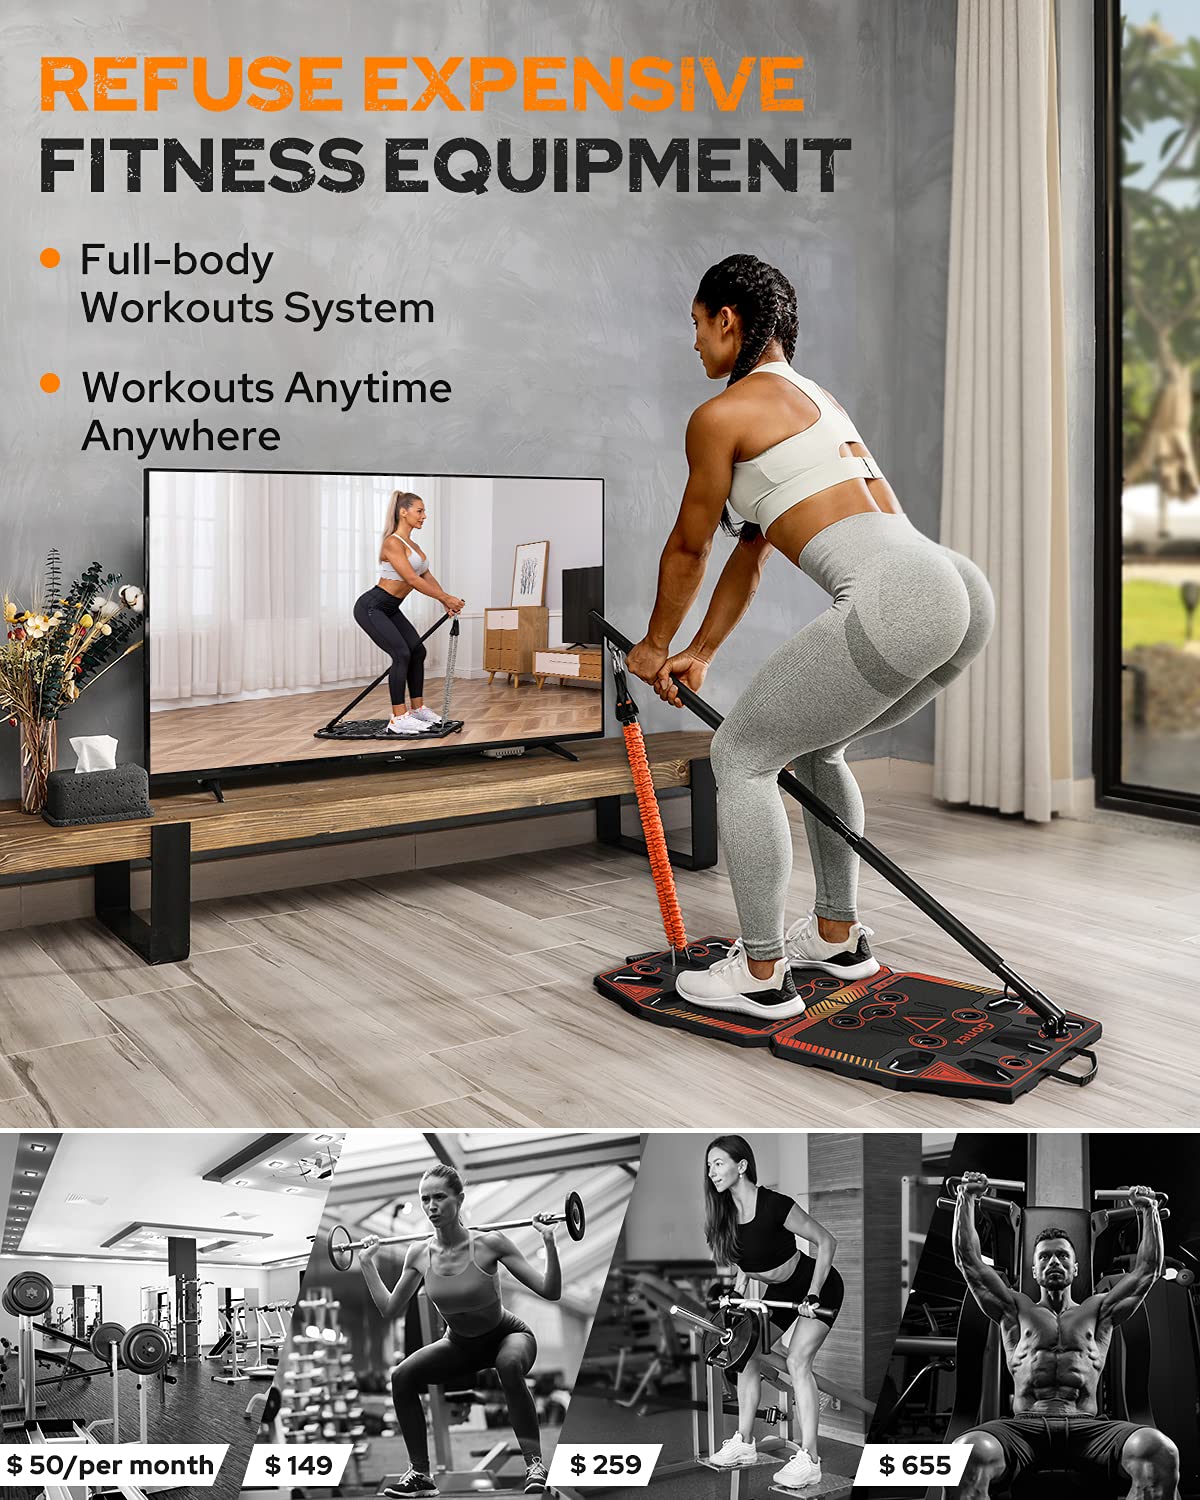 Gonex Portable Home Gym Workout Equipment with 14 Exercise Accessories Ab Roller Wheel,Elastic Resistance Bands,Push-up Stand,Post Landmine Sleeve and More for Full Body Workouts System